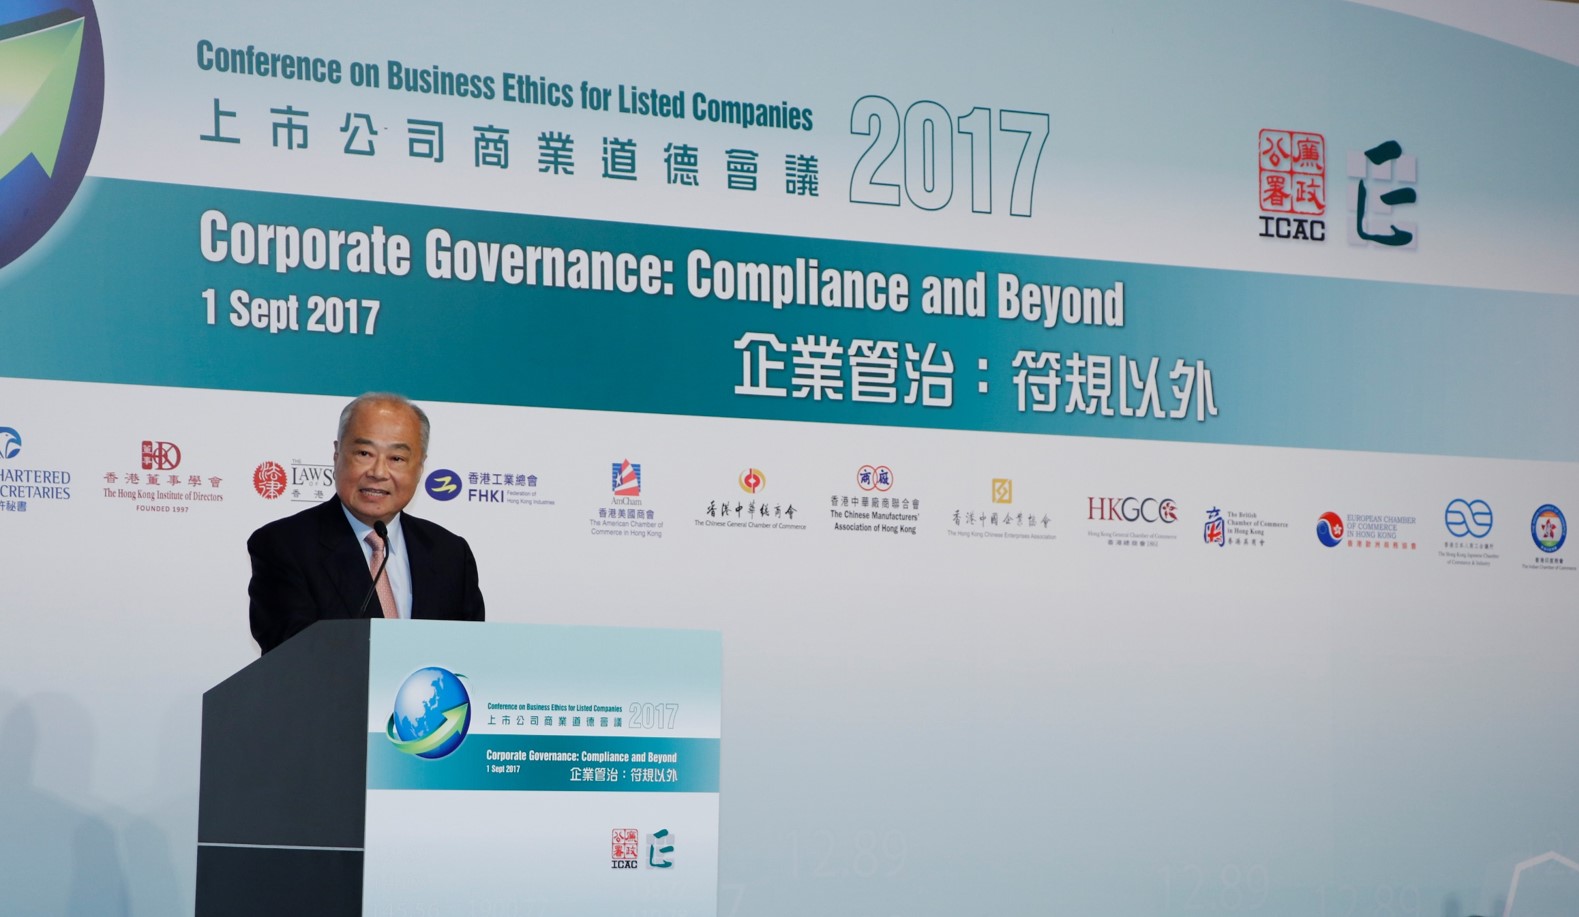 Mr Chow, as chairman of the HKEX, attends the ICAC’s Conference on Business Ethics for Listed Companies in 2017